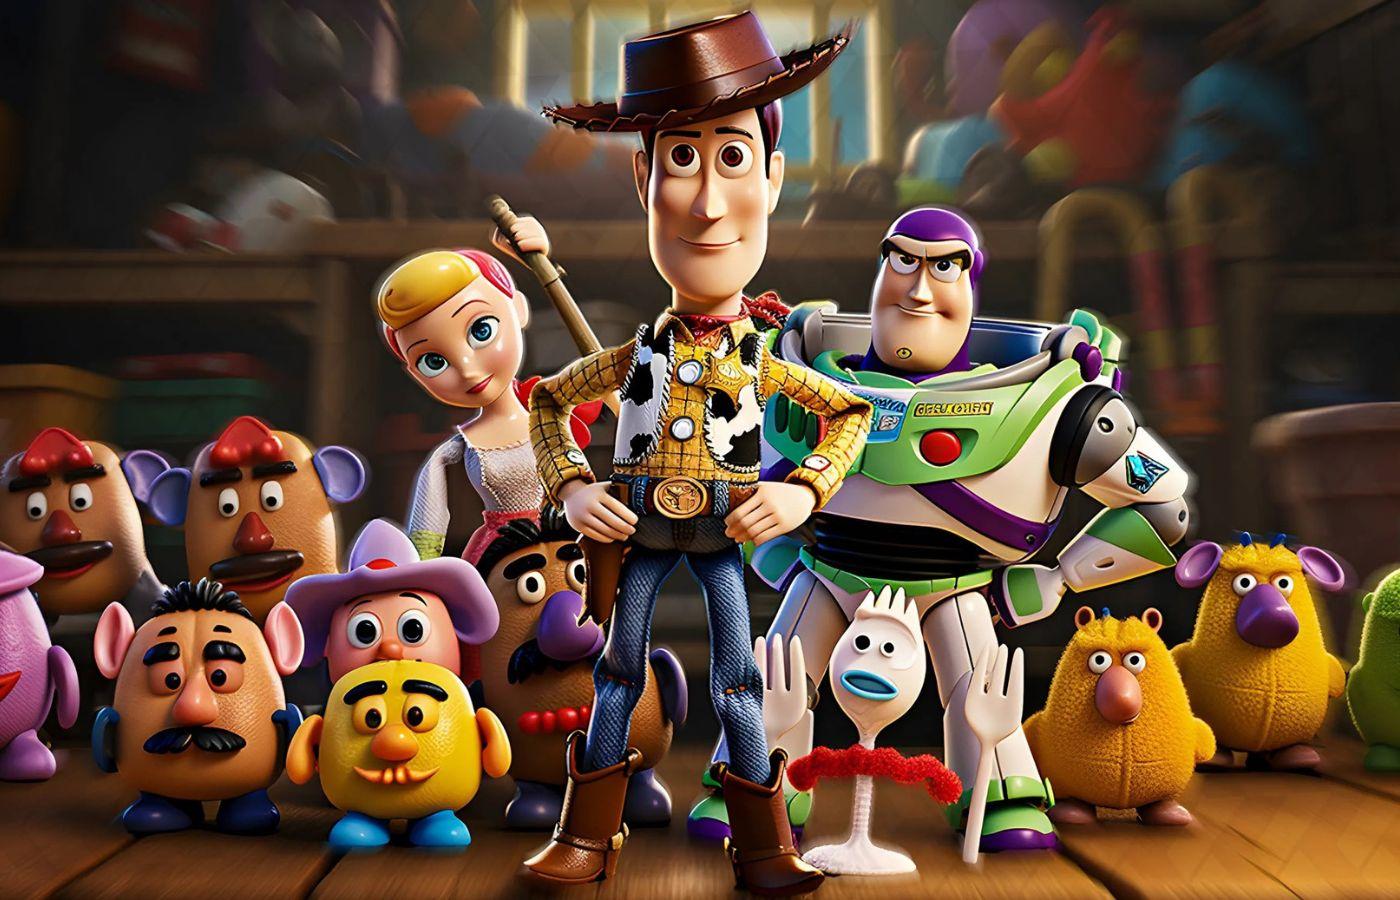 The cast of Toy Story 5